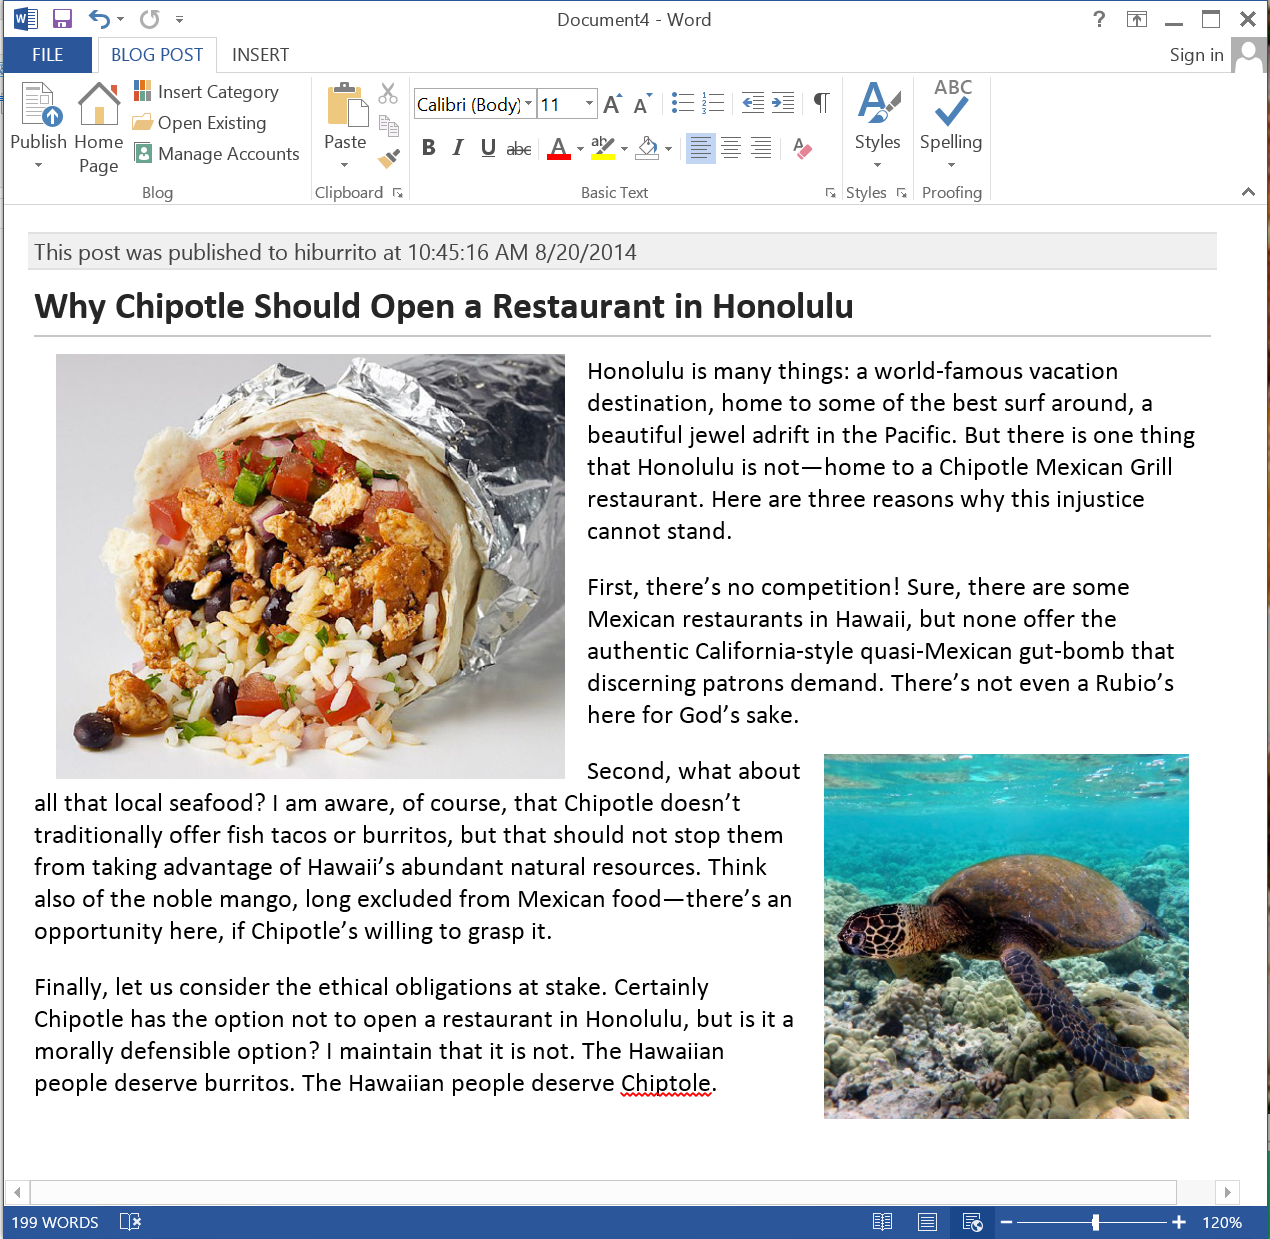 how-to-start-blogging-using-microsoft-word-with-wordpress-or-blogger